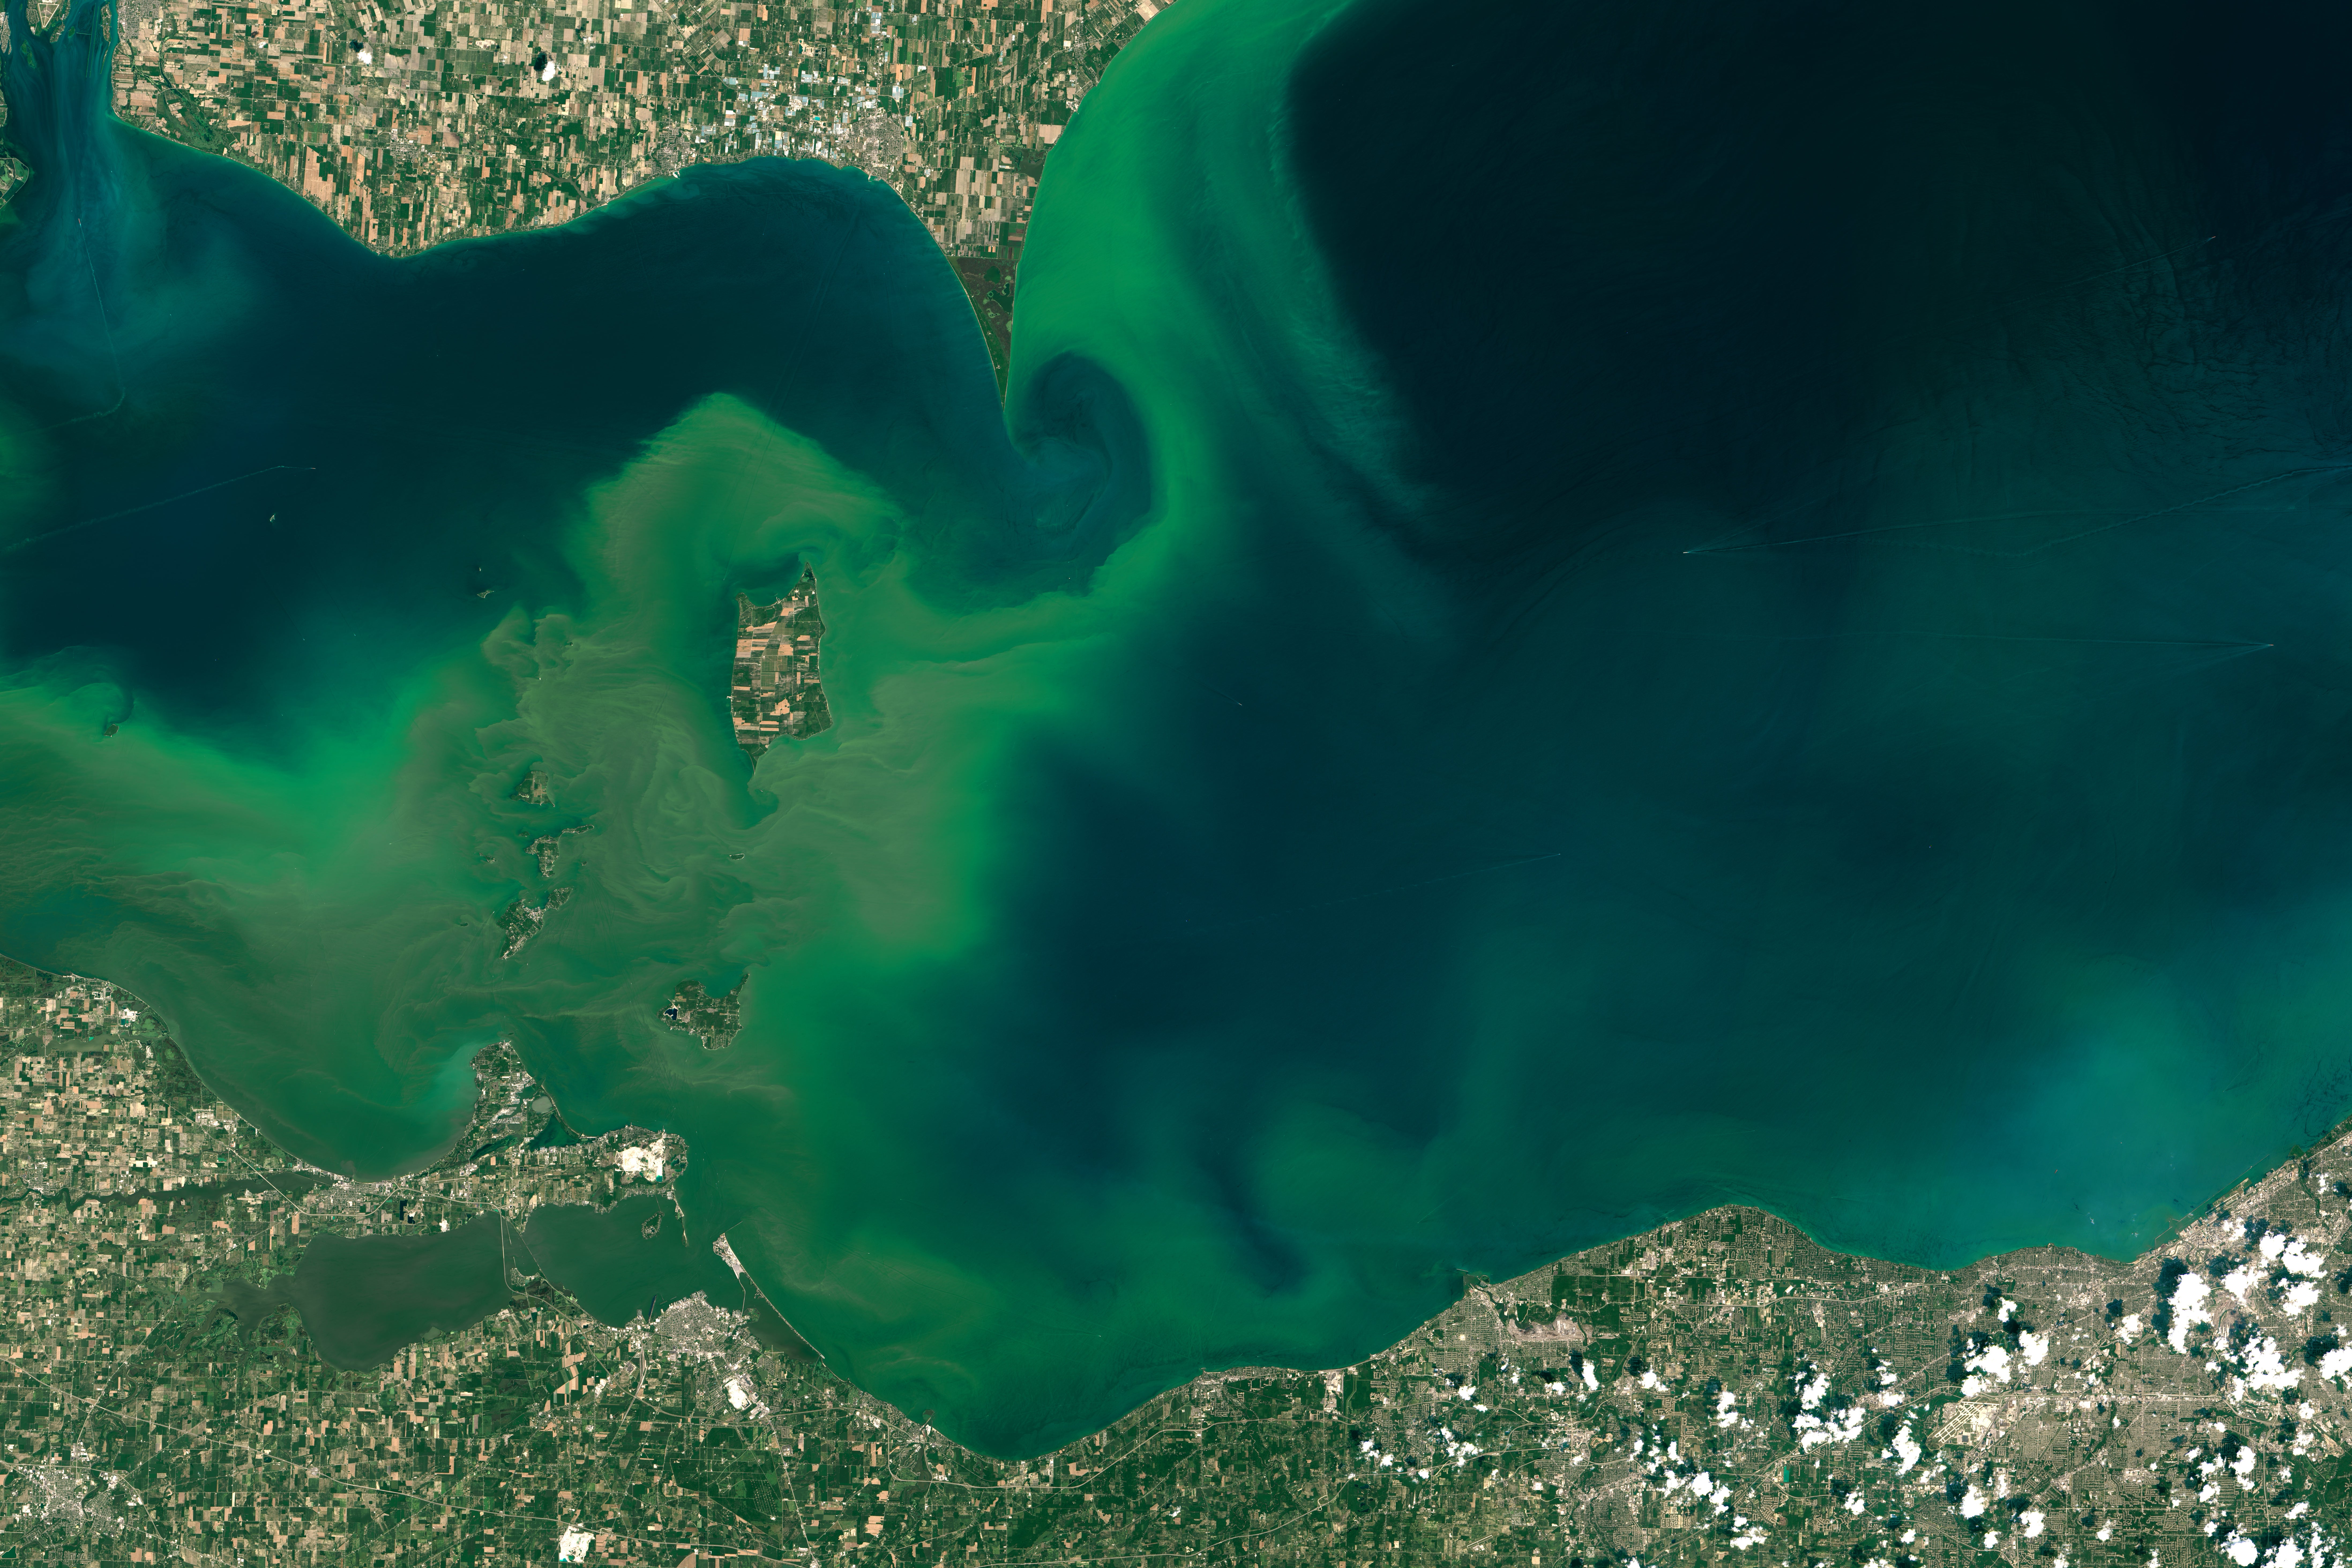 A wet summer, warm temperatures and fertilizer runoff combined in a perfect storm that has erupted an <a href="http://www.washingtonpost.com/blogs/capital-weather-gang/wp/2015/08/07/lake-erie-is-in-the-midst-of-yet-another-dangerous-disgusting-algae-outbreak/">algal bloom in Lake Erie</a>, which rivals the worst one ever recorded in 2011. Algae fed off the phosphorous and nitrogen in fertilizer runoff from farms in Ohio and Indiana, and <a href="https://www.popsci.com/article/science/big-pic-texas-sized-algae-bloom/">exploded in numbers</a> once they reached the lake. <a href="http://earthobservatory.nasa.gov/IOTD/view.php?id=86327">Algal blooms</a> can <a href="https://www.popsci.com/article/science/lake-eries-toxic-algal-bloom-seen-space/">deprive waterways of oxygen</a>, killing the fish and marine life. They can also be harmful to pets, impede recreation, and sometimes <a href="http://earthobservatory.nasa.gov/IOTD/view.php?id=84125">render the drinking water unsafe</a>. Luckily, the water in Toledo, Ohio today is still <a href="http://toledo.oh.gov/services/public-utilities/water-treatment/water-quality/">safe for drinking</a>.